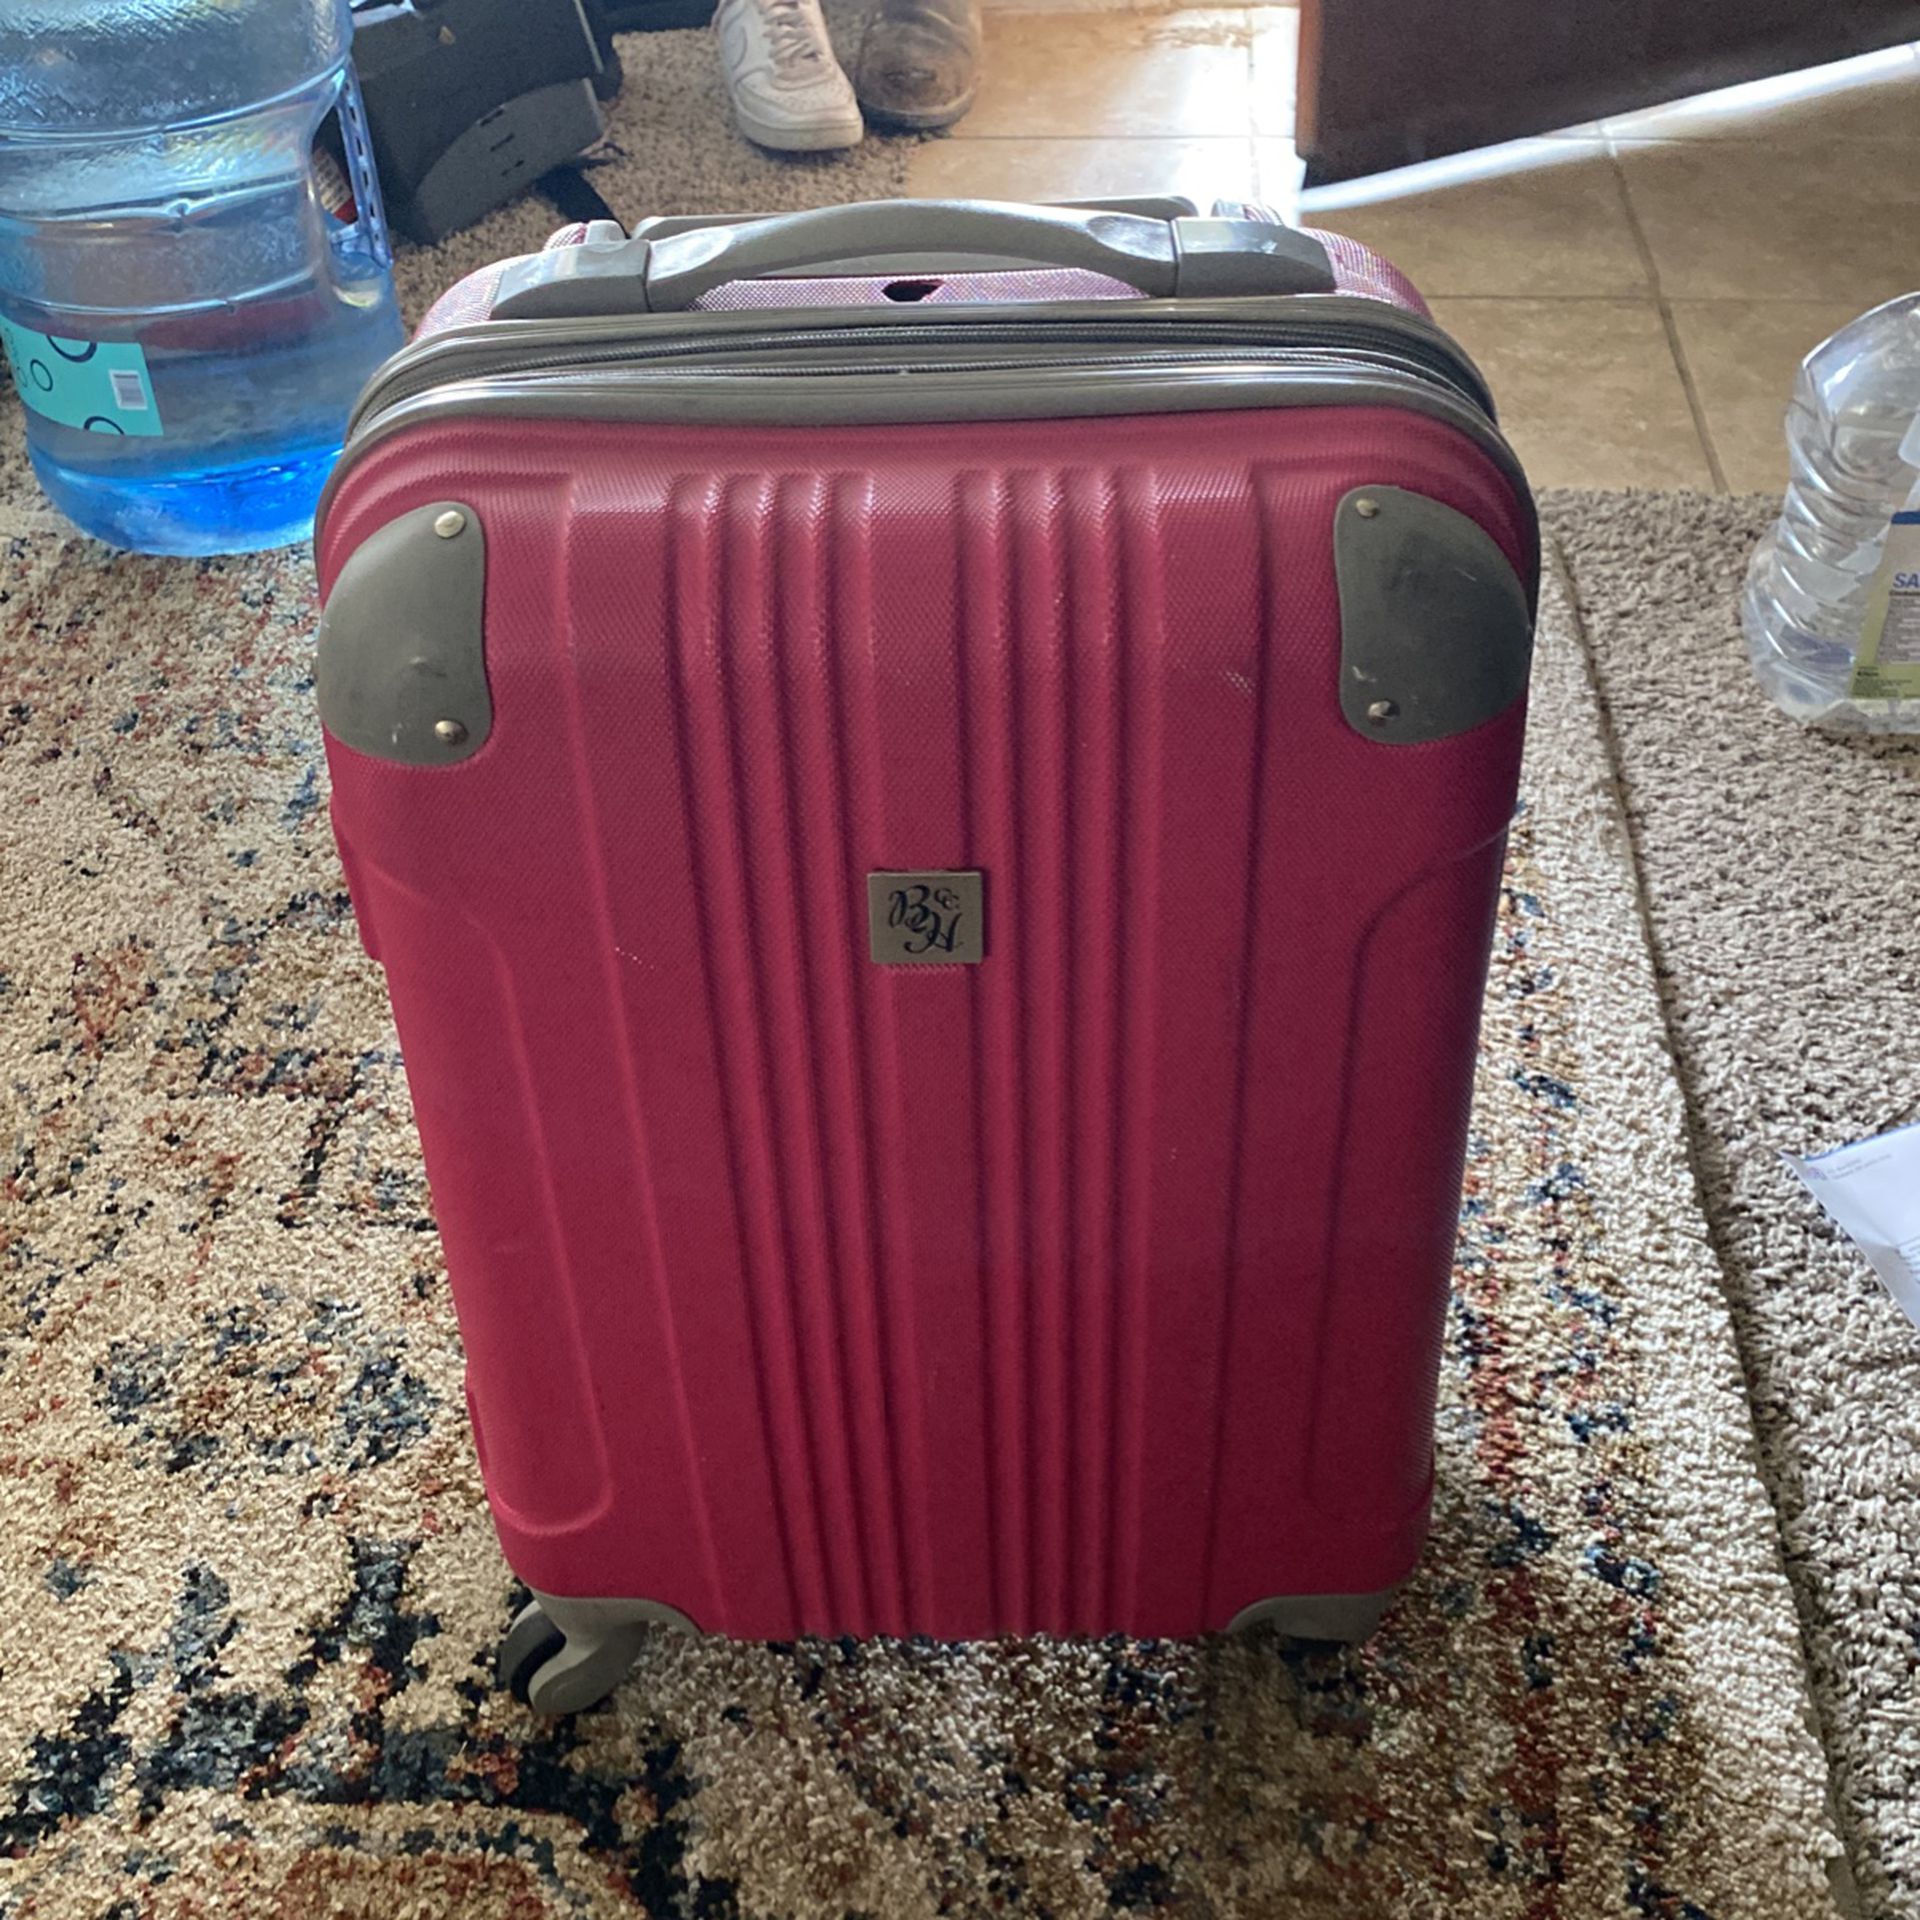 Pink Suitcase